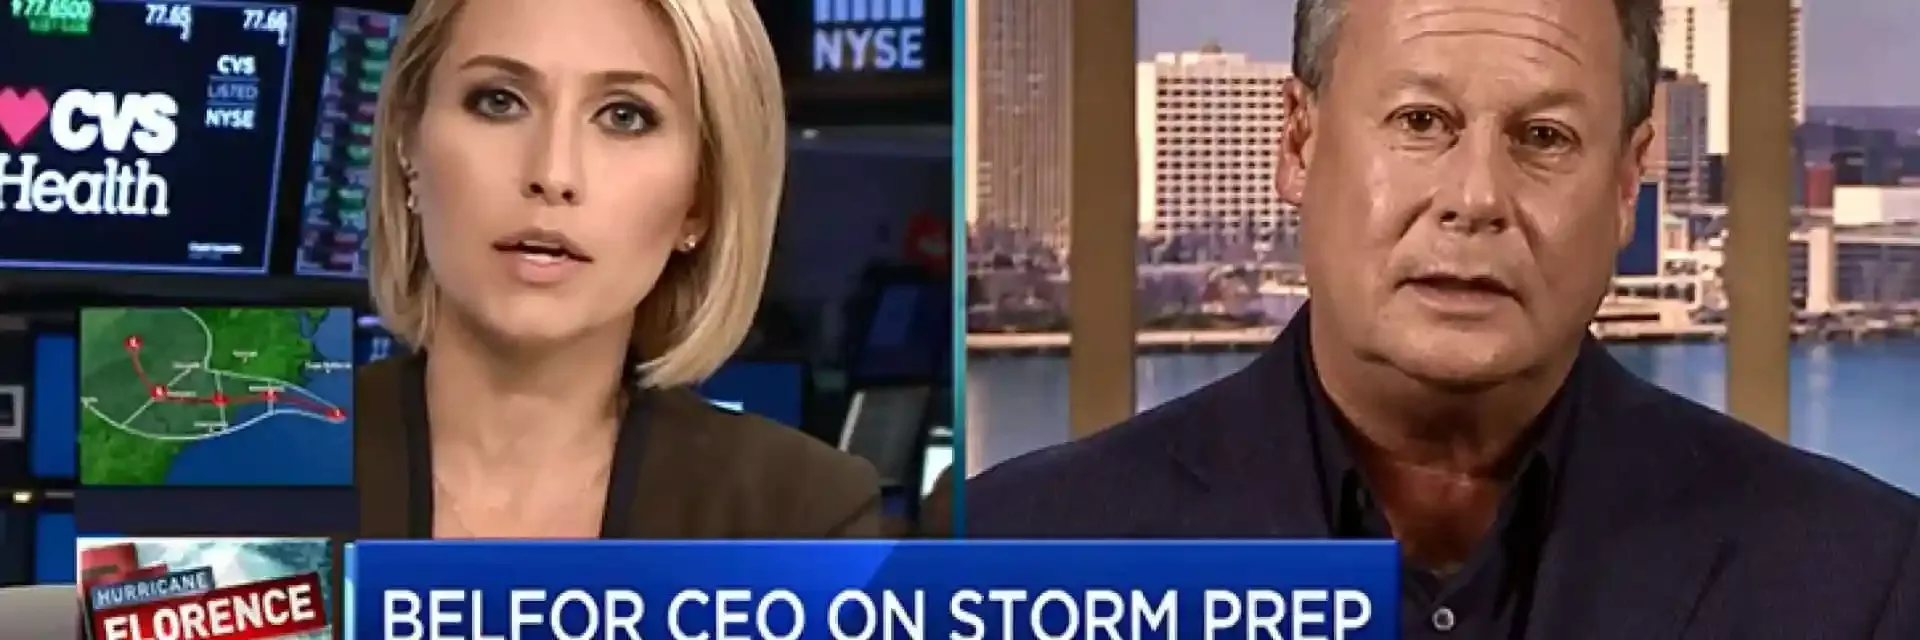 BELFOR CEO Sheldon Yellen Discusses Hurricane Florence on CNBC